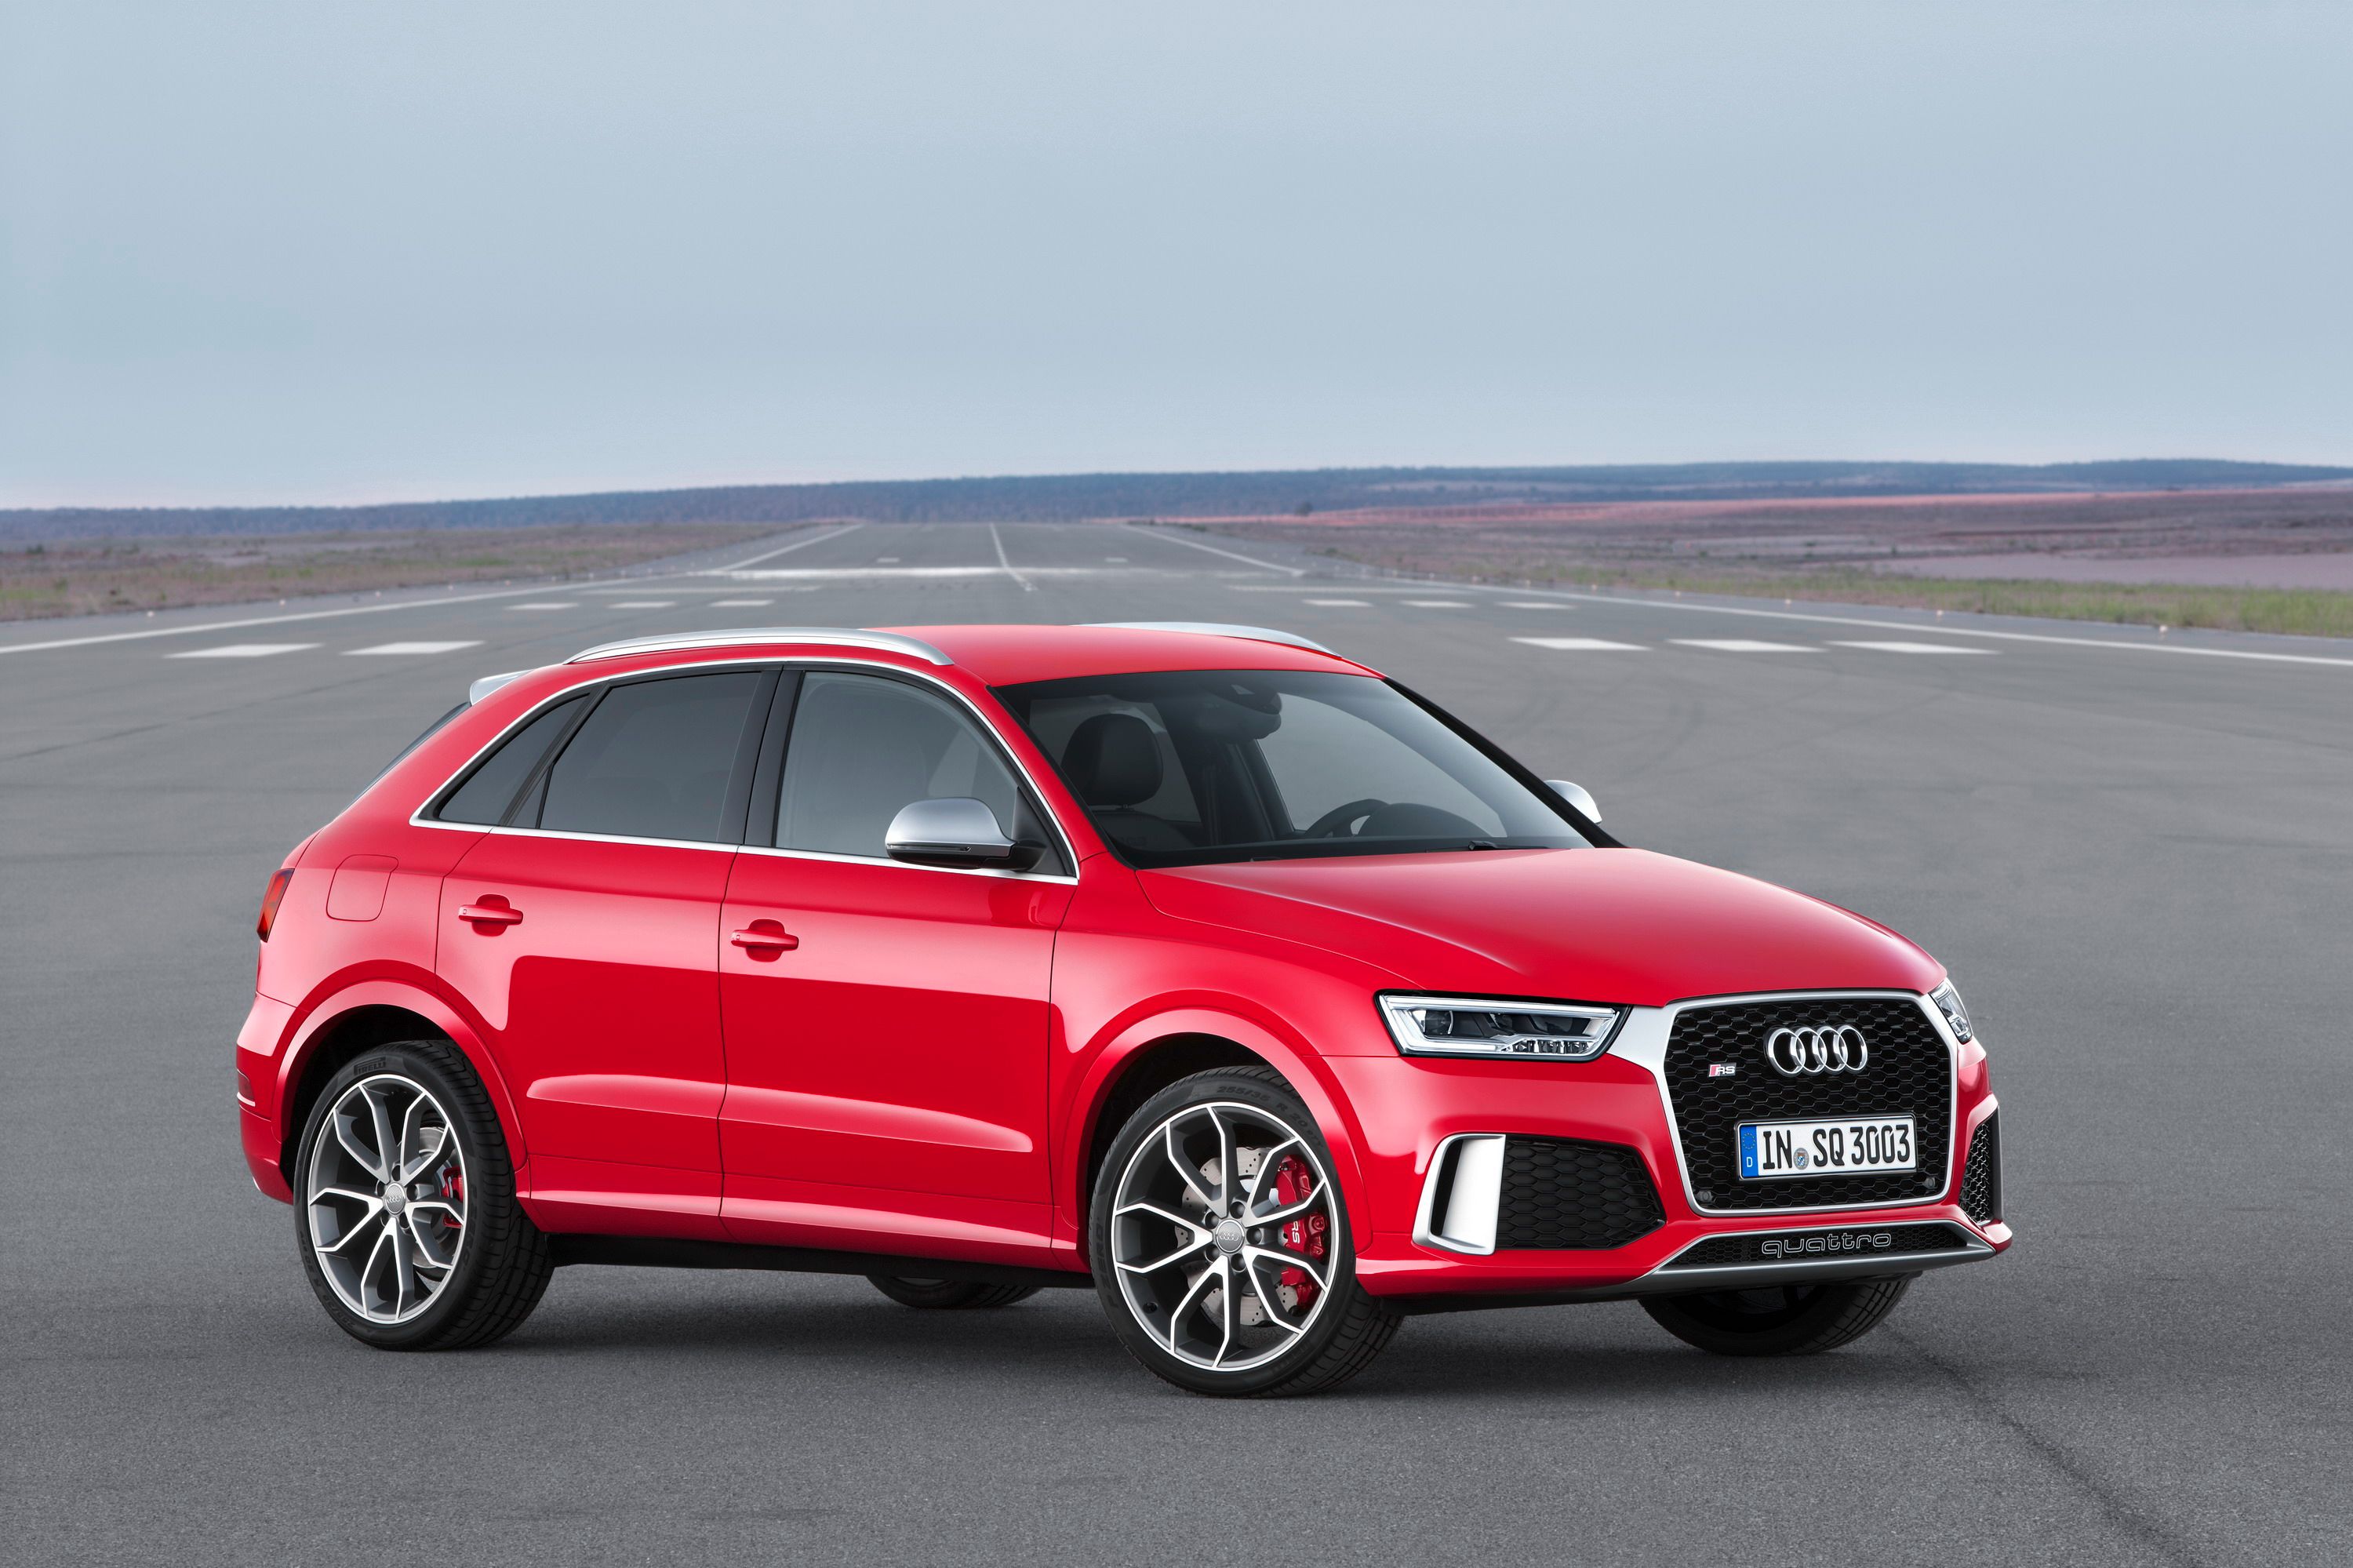 The Audi RS Q3 is the other big competitor